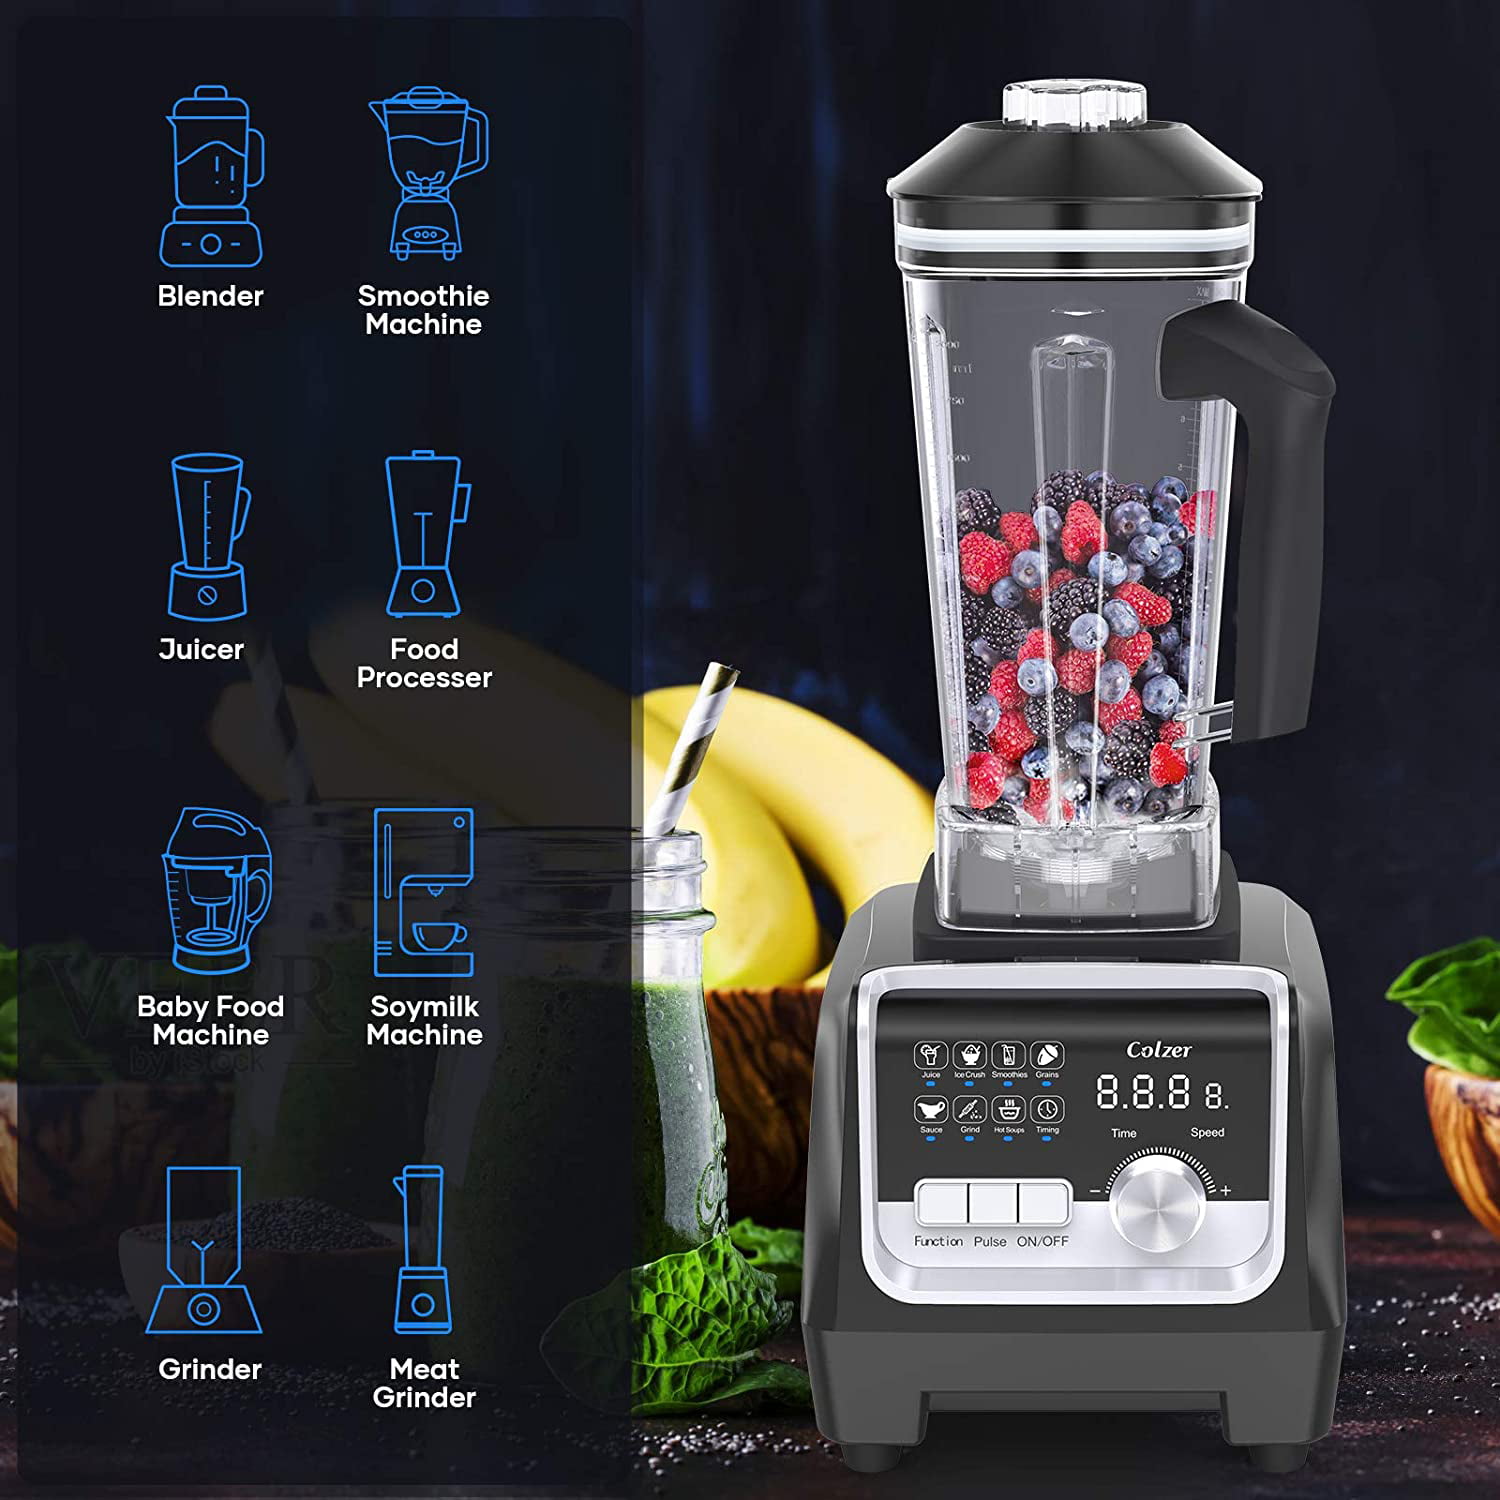 Professional Countertop Blender with 2200-Watt Auto-iQ Base,Touchscreen Display,High Power Blender for Frozen Drinks,Shakes and Smoothies COLZER Blender for Shakes and Smoothies